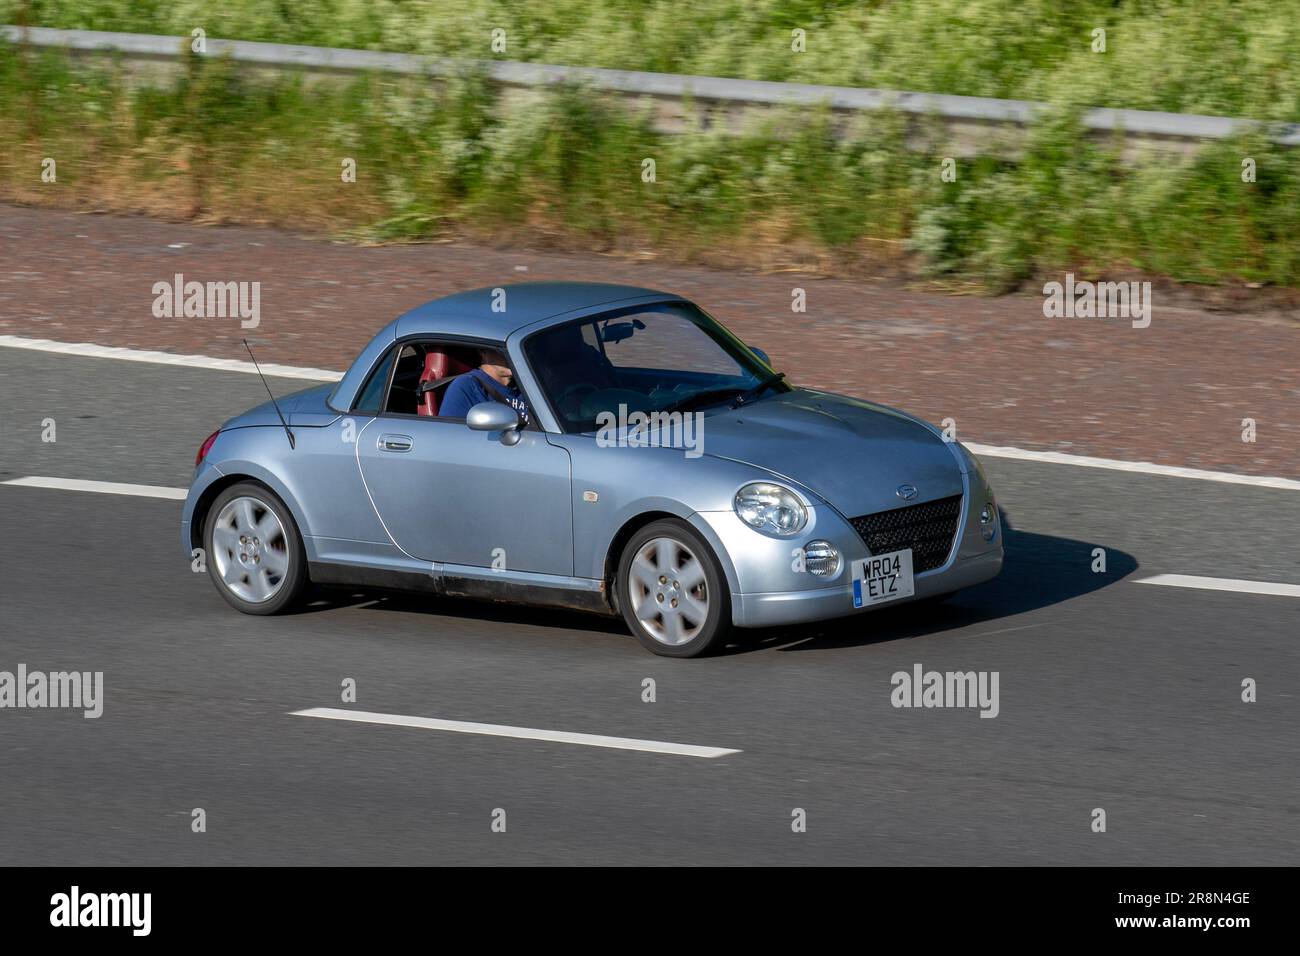 2004 Daihatsu Copen, funky little convertible, 2-door kei car with metal folding roof, travelling on the M6 motorway in Greater Manchester, UK Stock Photo